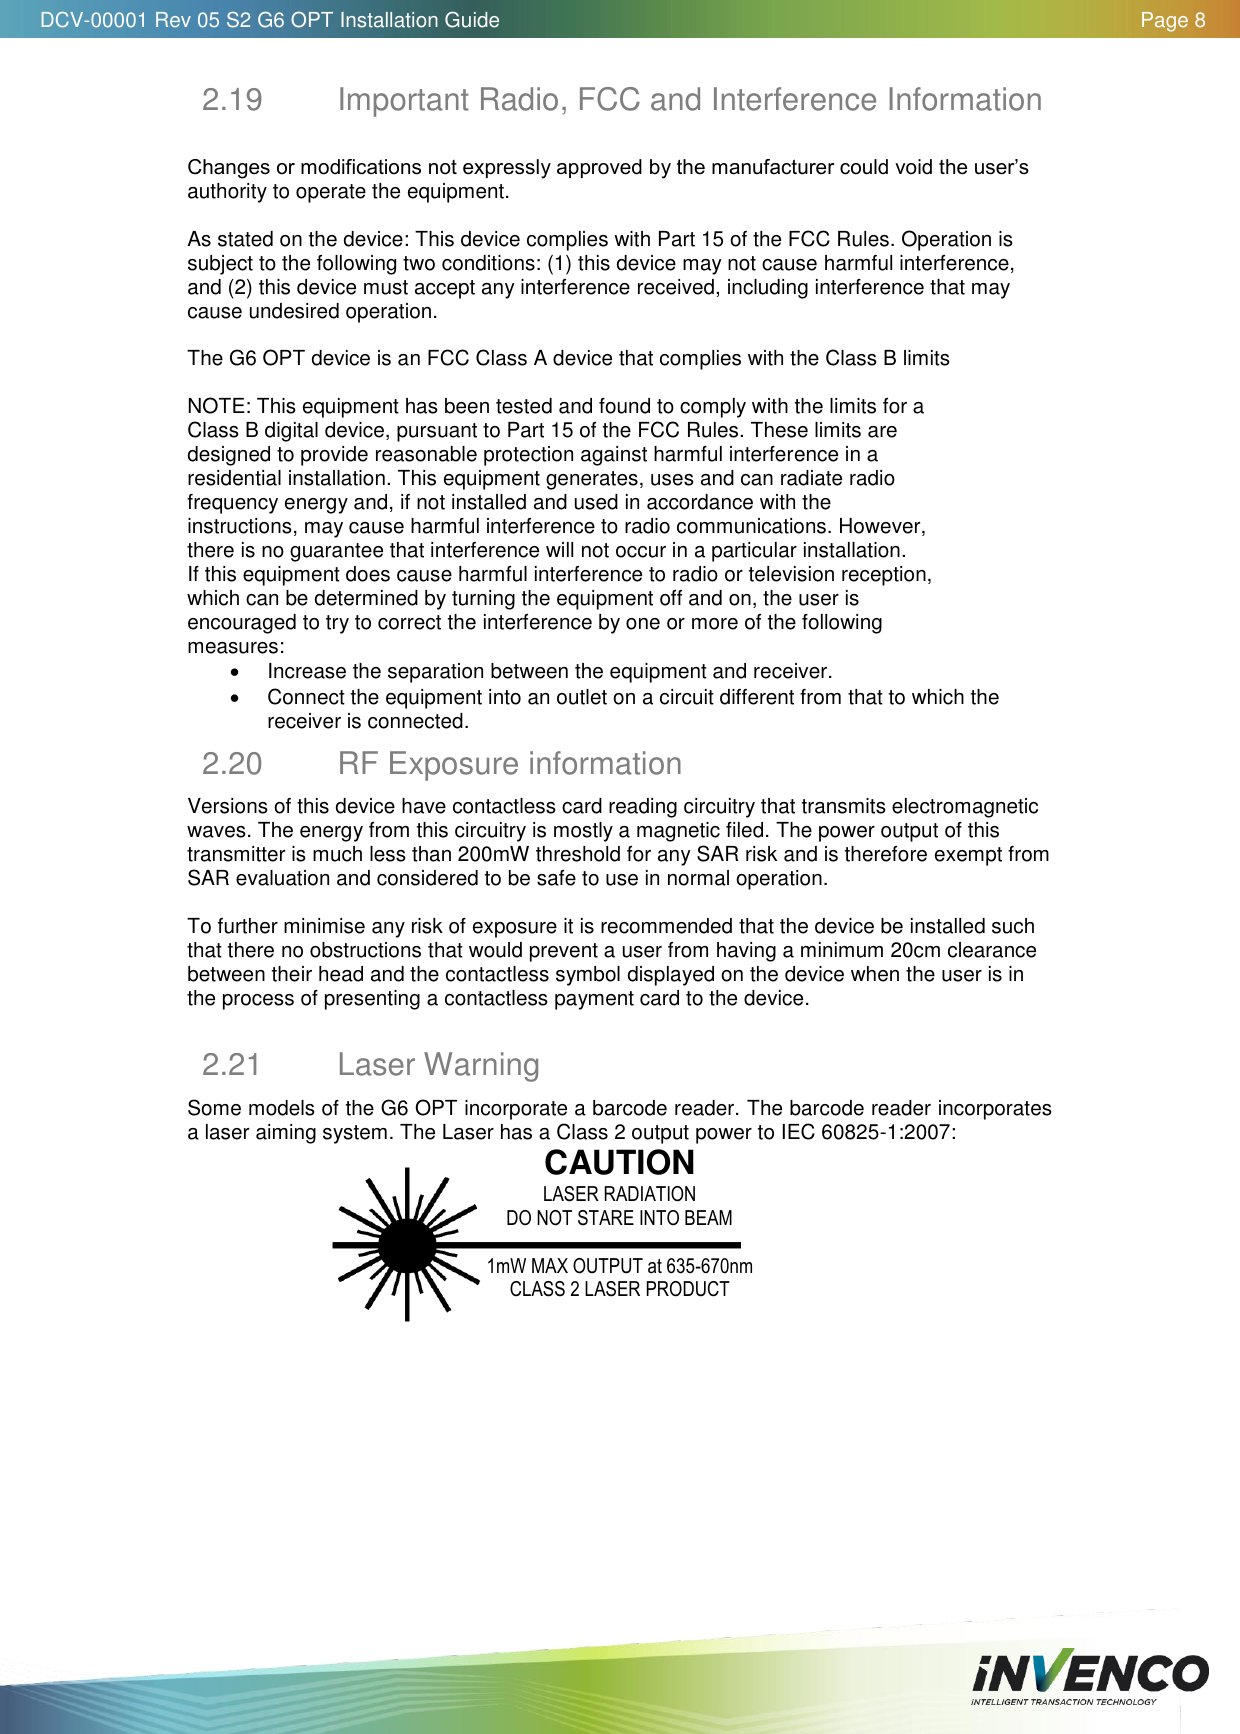   DCV-00001 Rev 05 S2 G6 OPT Installation Guide    Page 8  2.19  Important Radio, FCC and Interference Information  Changes or modifications not expressly approved by the manufacturer could void the user’s authority to operate the equipment.  As stated on the device: This device complies with Part 15 of the FCC Rules. Operation is subject to the following two conditions: (1) this device may not cause harmful interference, and (2) this device must accept any interference received, including interference that may cause undesired operation.  The G6 OPT device is an FCC Class A device that complies with the Class B limits   NOTE: This equipment has been tested and found to comply with the limits for a Class B digital device, pursuant to Part 15 of the FCC Rules. These limits are designed to provide reasonable protection against harmful interference in a residential installation. This equipment generates, uses and can radiate radio frequency energy and, if not installed and used in accordance with the instructions, may cause harmful interference to radio communications. However, there is no guarantee that interference will not occur in a particular installation. If this equipment does cause harmful interference to radio or television reception, which can be determined by turning the equipment off and on, the user is encouraged to try to correct the interference by one or more of the following measures:   Increase the separation between the equipment and receiver.   Connect the equipment into an outlet on a circuit different from that to which the receiver is connected. 2.20  RF Exposure information Versions of this device have contactless card reading circuitry that transmits electromagnetic waves. The energy from this circuitry is mostly a magnetic filed. The power output of this transmitter is much less than 200mW threshold for any SAR risk and is therefore exempt from SAR evaluation and considered to be safe to use in normal operation.   To further minimise any risk of exposure it is recommended that the device be installed such that there no obstructions that would prevent a user from having a minimum 20cm clearance between their head and the contactless symbol displayed on the device when the user is in the process of presenting a contactless payment card to the device.   2.21  Laser Warning Some models of the G6 OPT incorporate a barcode reader. The barcode reader incorporates a laser aiming system. The Laser has a Class 2 output power to IEC 60825-1:2007:  CAUTION LASER RADIATION DO NOT STARE INTO BEAM  1mW MAX OUTPUT at 635-670nm CLASS 2 LASER PRODUCT    